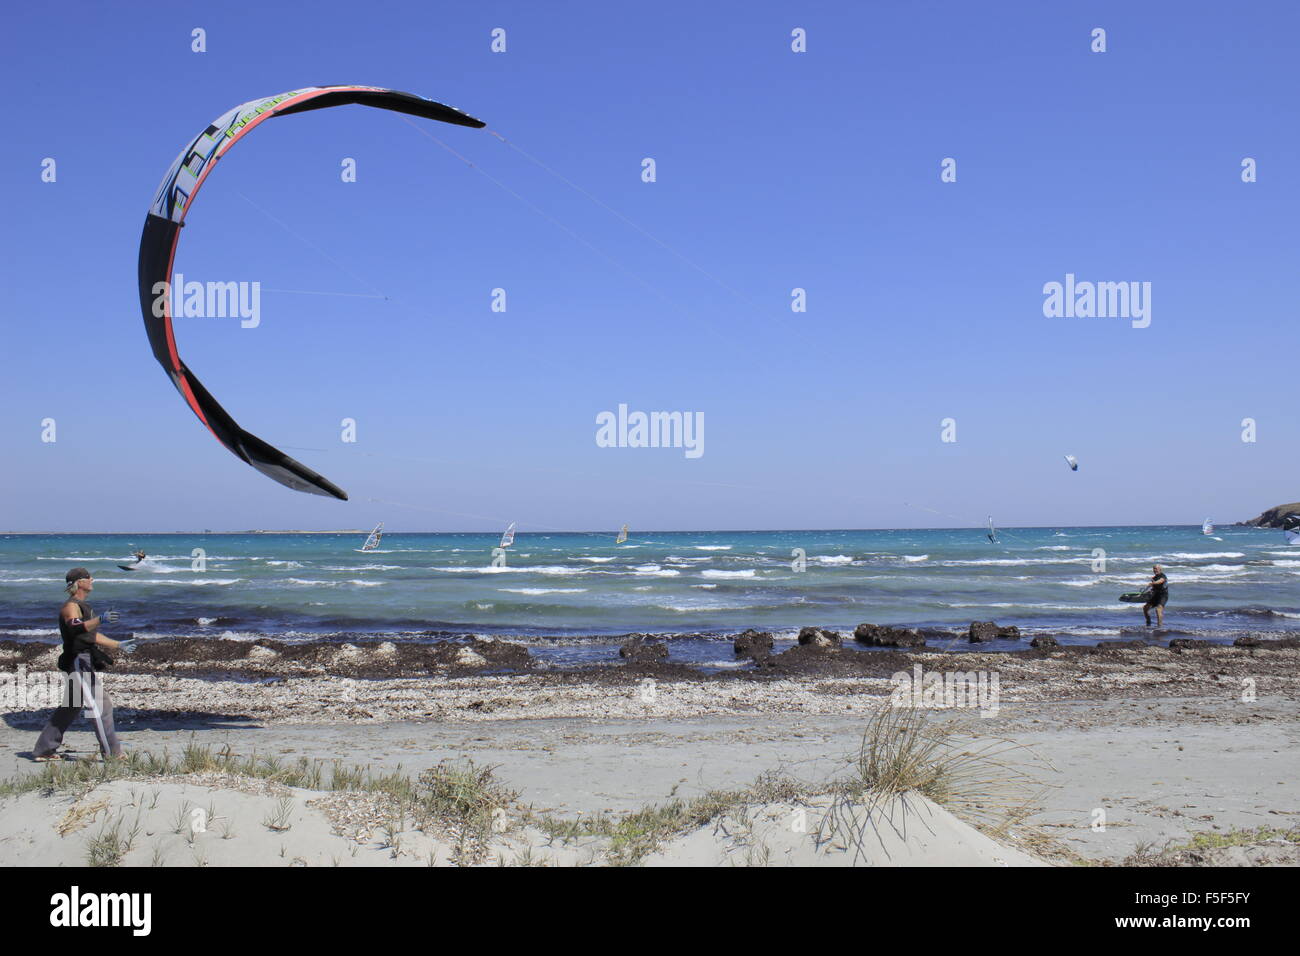 Parasurfer (in the sea) and helper landing a kite on Keros bay beach, Lemnos or limnos island, Greece. Stock Photo